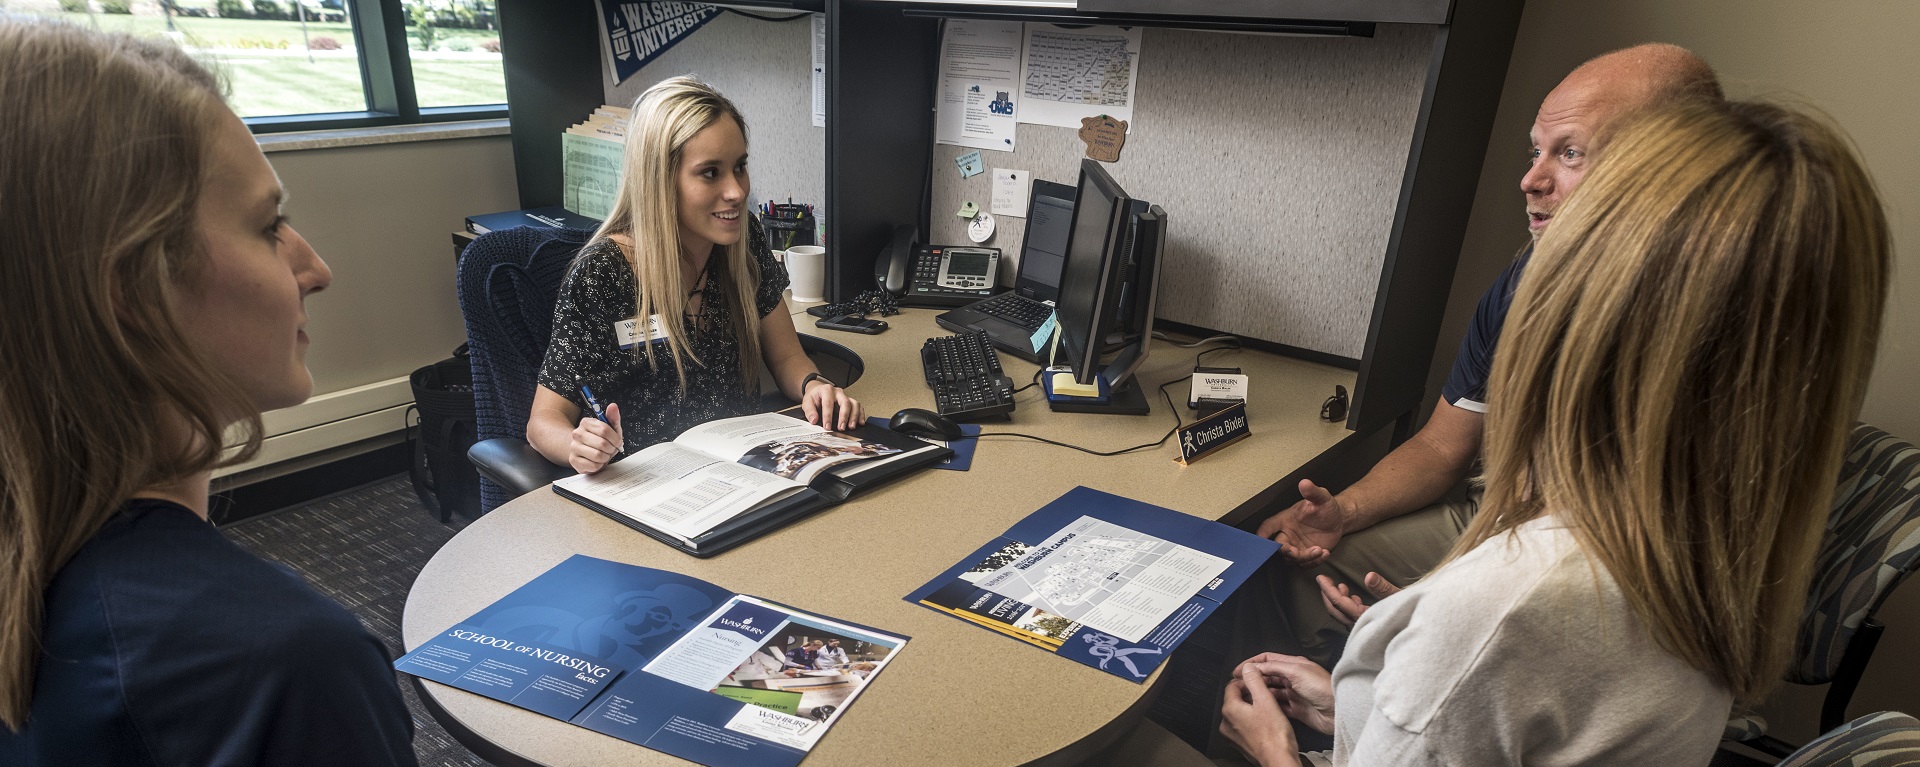 A Washburn admissions counselor meets with a prospective student and her parents in the Welcome Center.